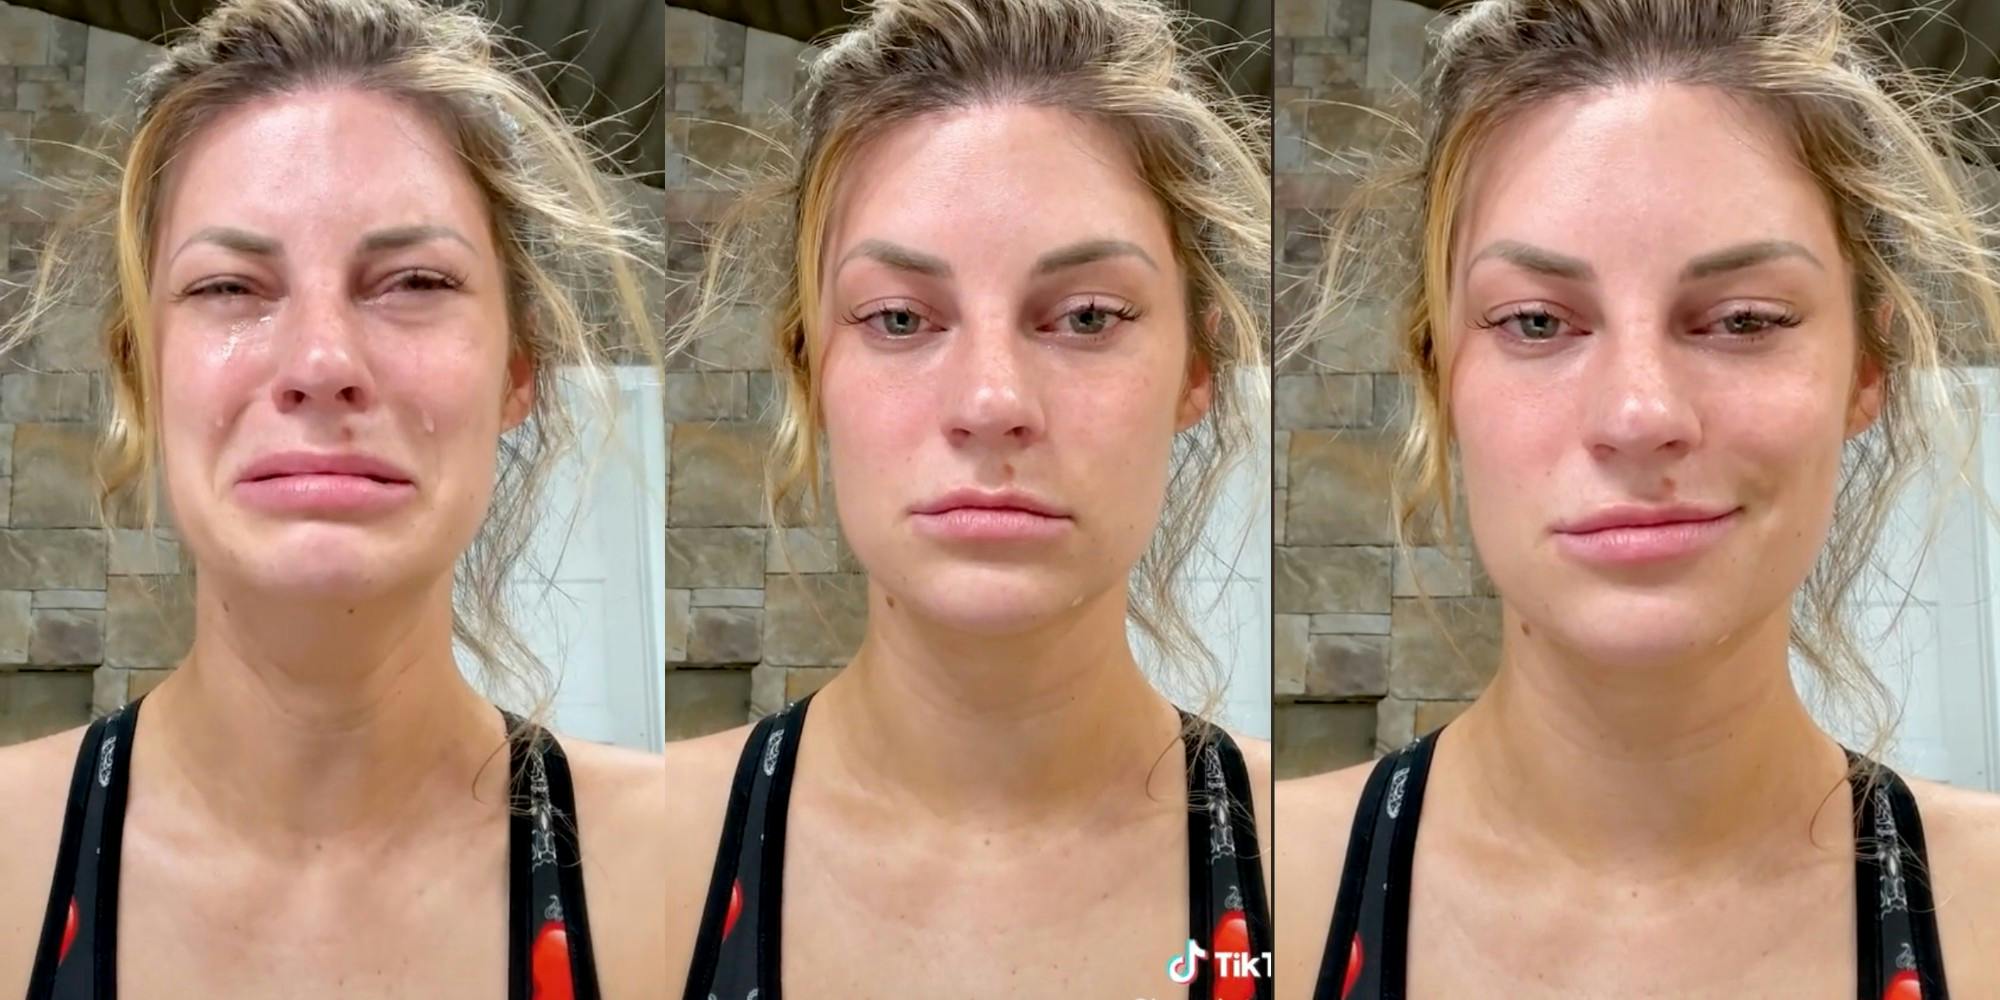 influencer hannah stocking doing the trend, seen crying, stone face, then smiling